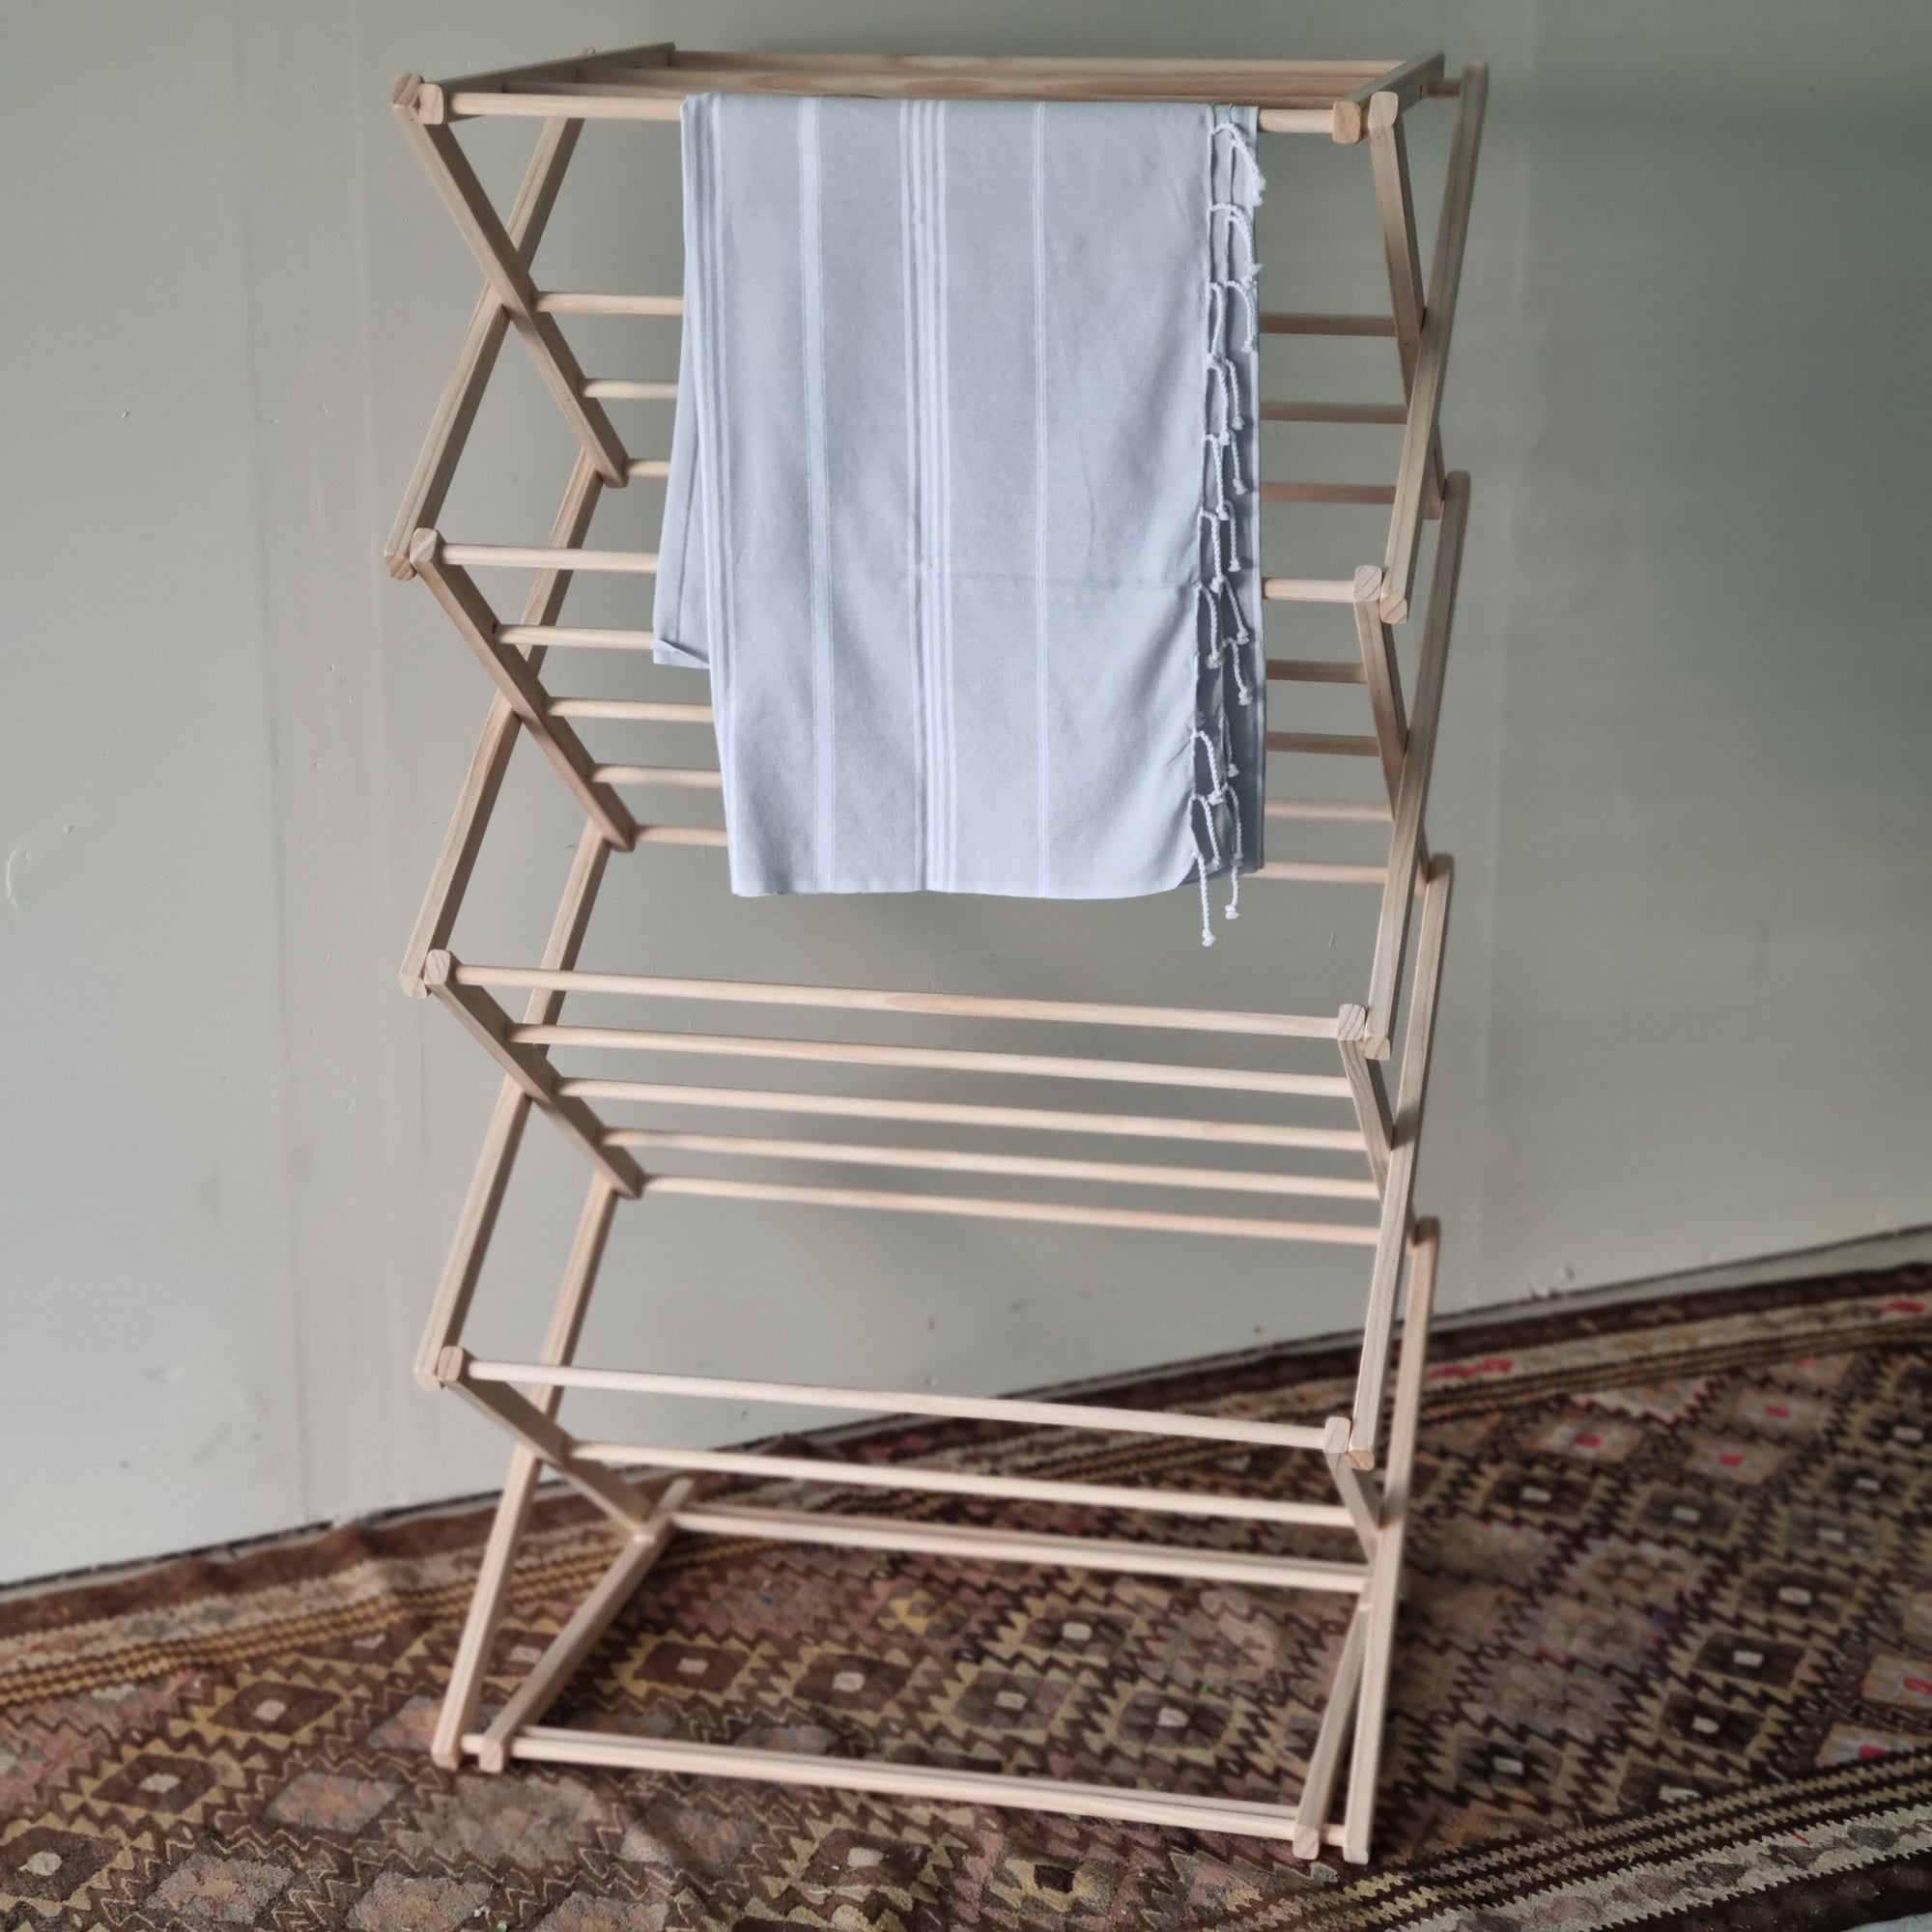 Wooden Clothes Drying Rack